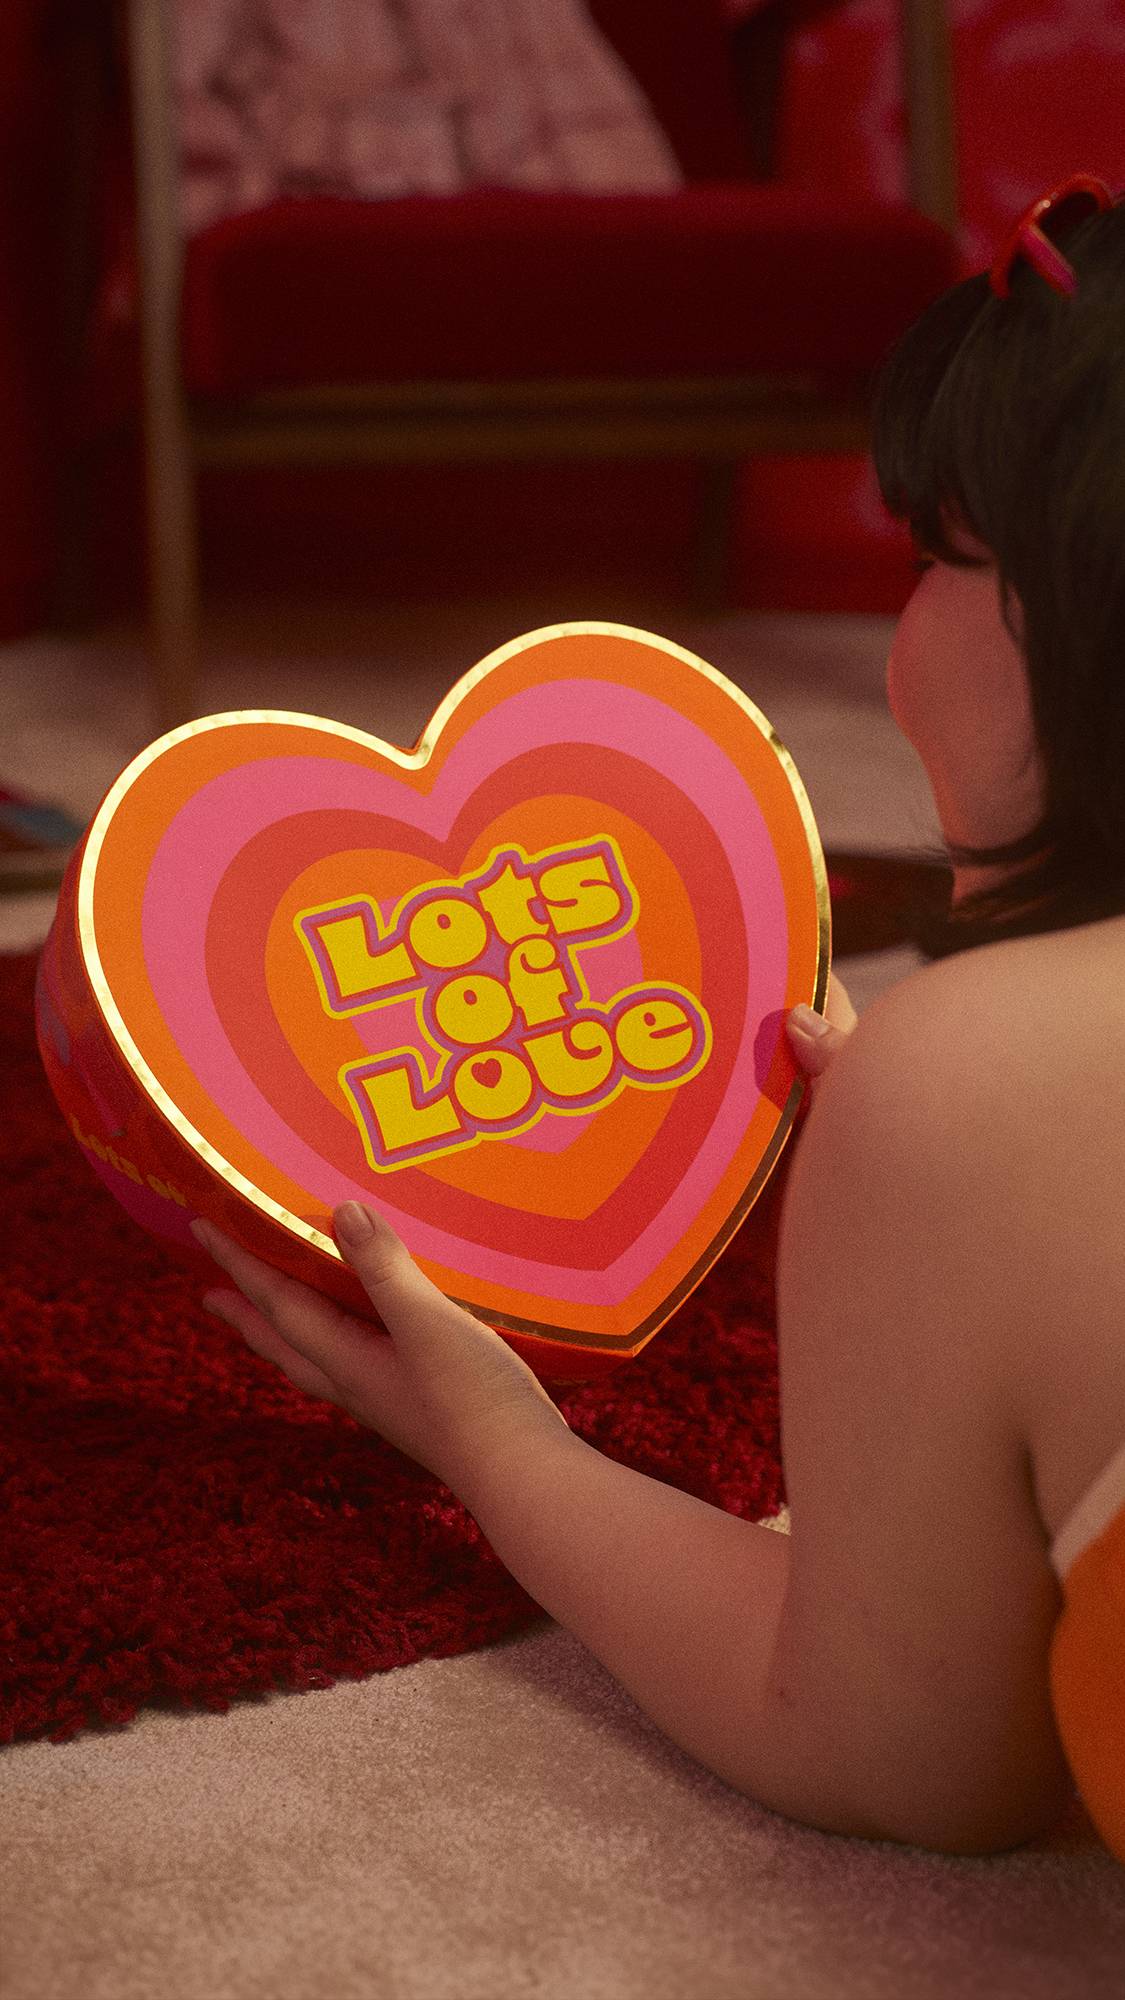 The image shows the model facing away as they are lying on the floor and holding the Lots of Love gift box. 